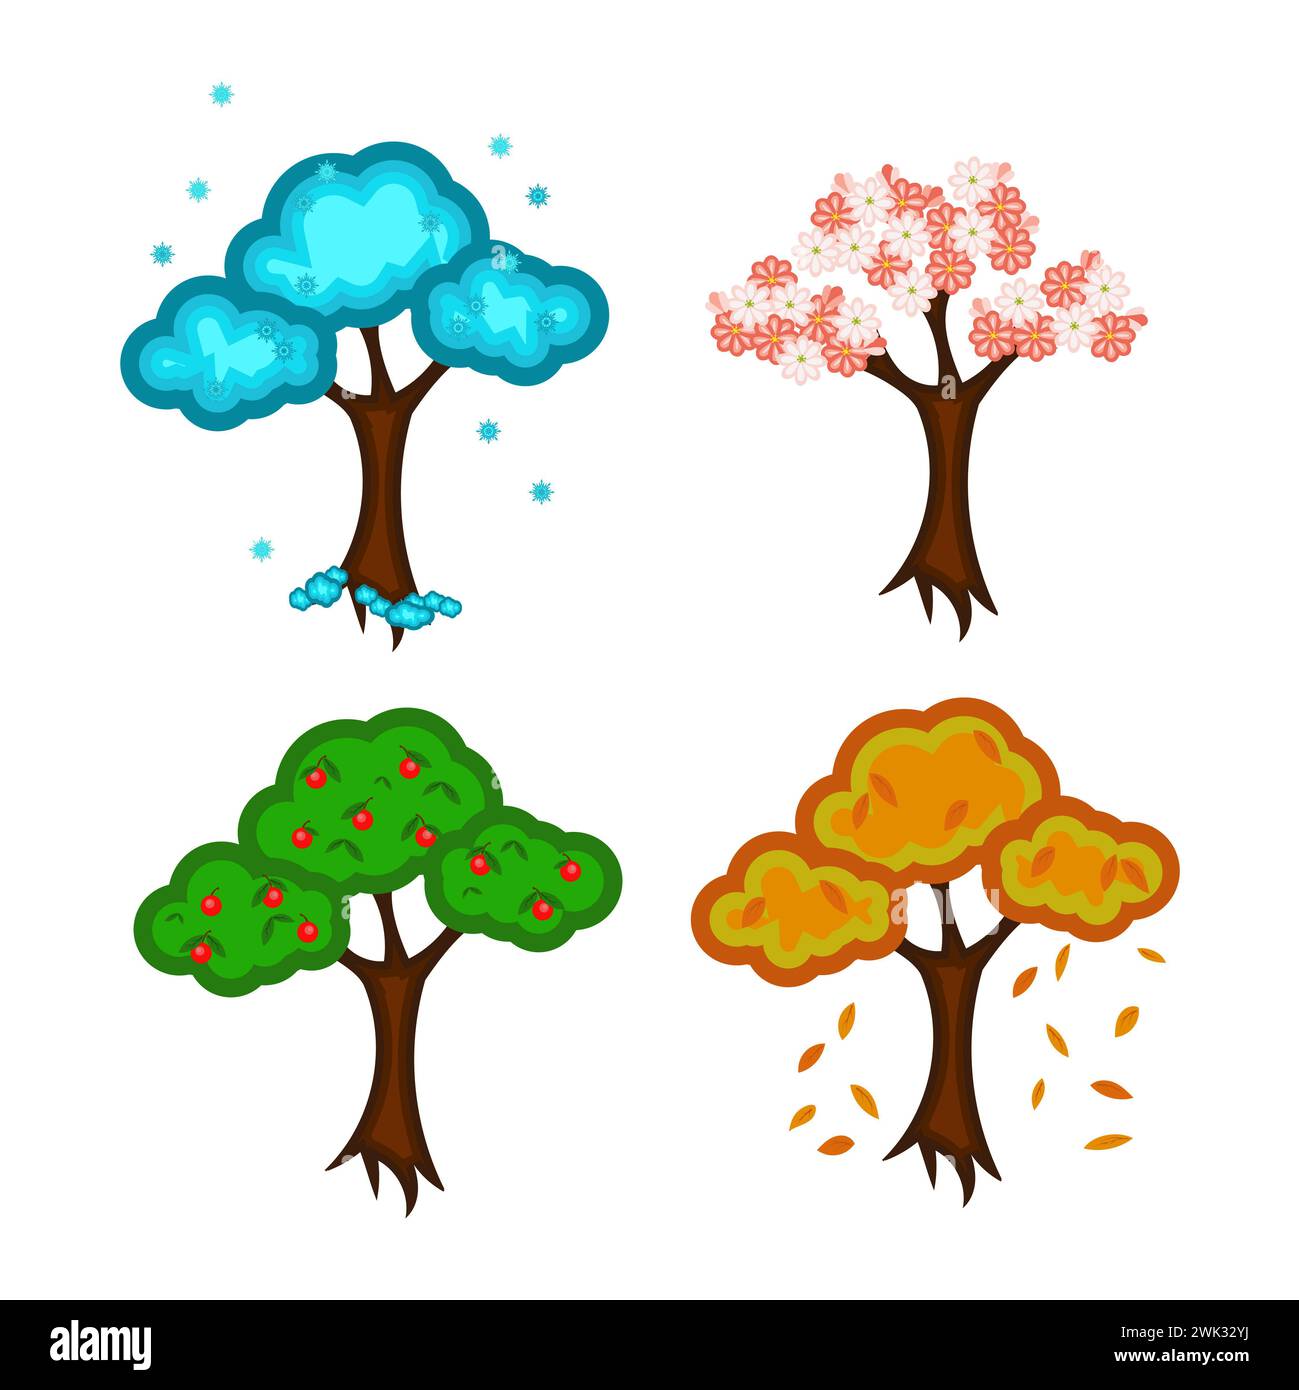 Four seasons. Painted trees: winter, spring, summer, autumn. Isolated on white background without shadow. Stock Photo